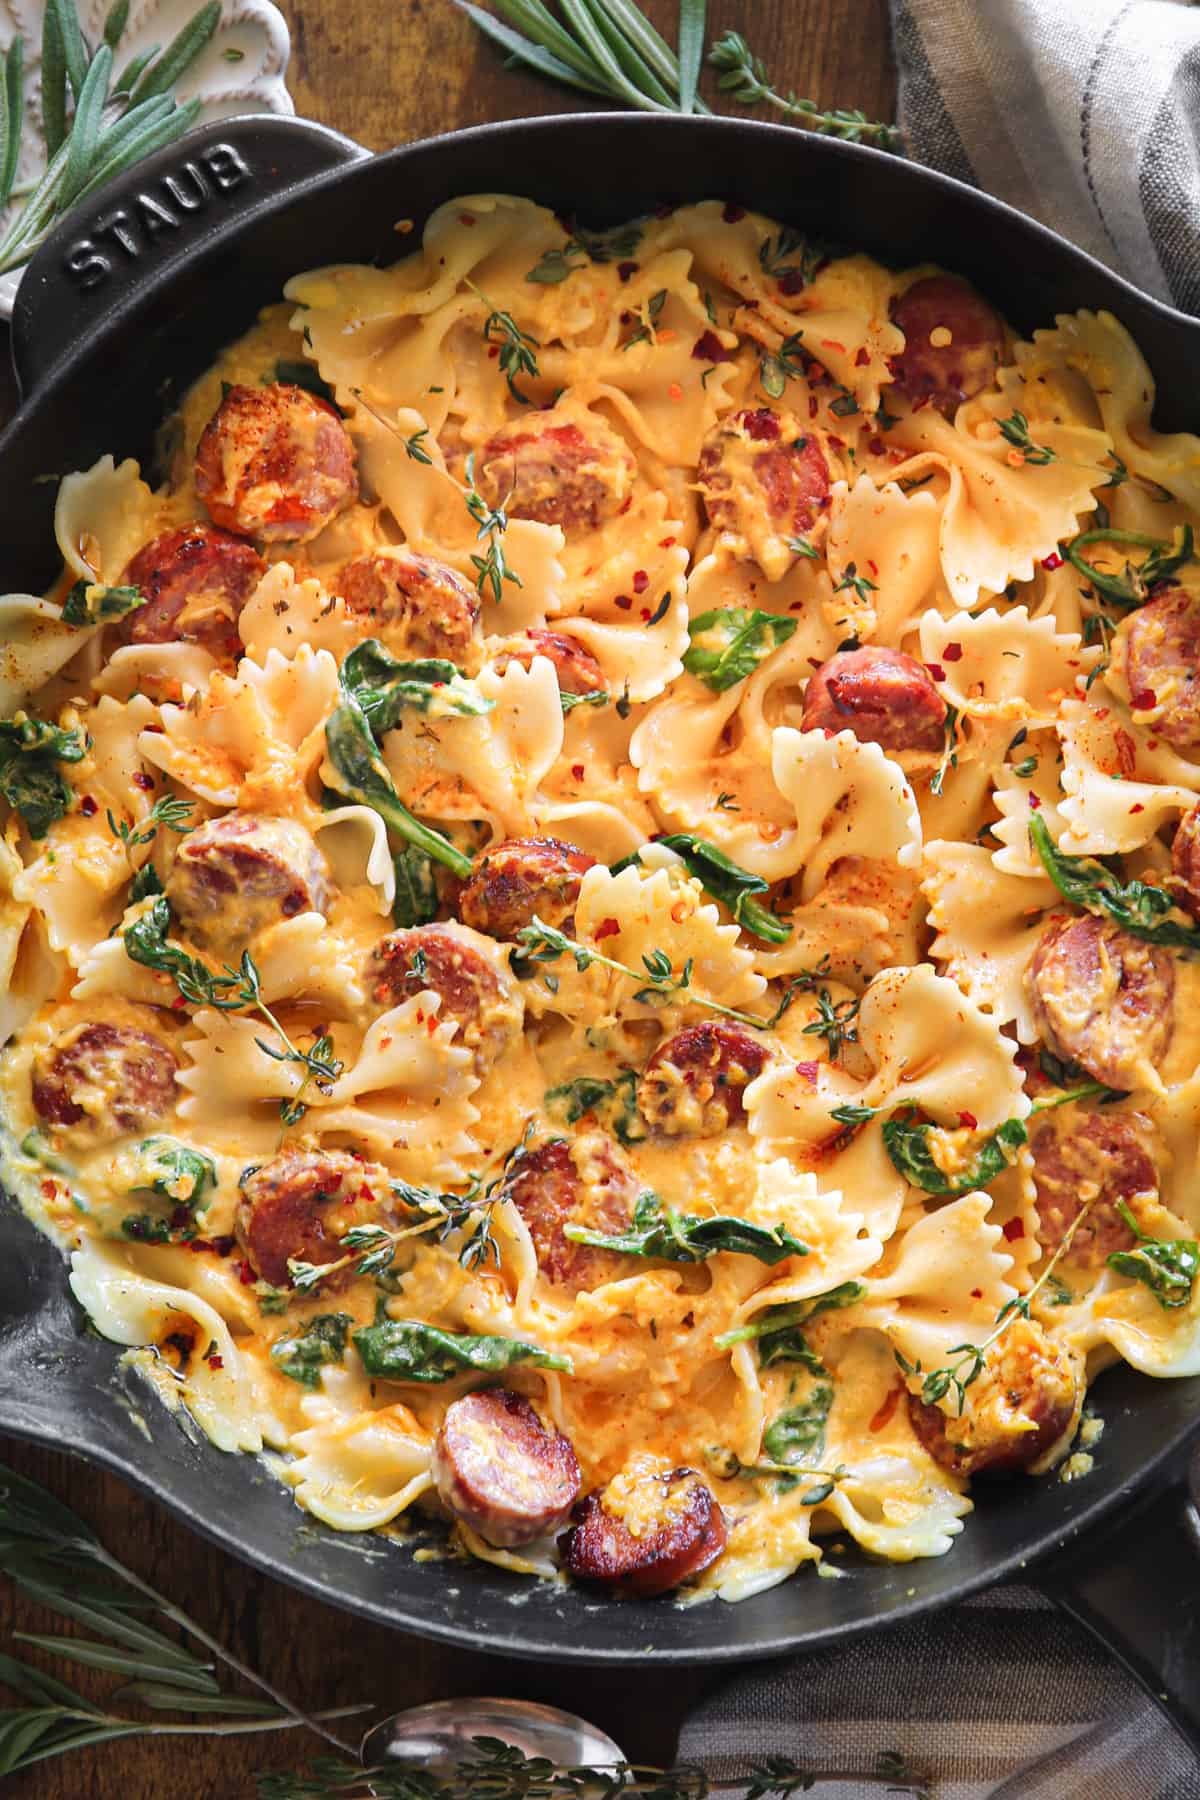 Creamy Acorn Squash Pasta with Sausage and Spinach in a cast iron skillet.